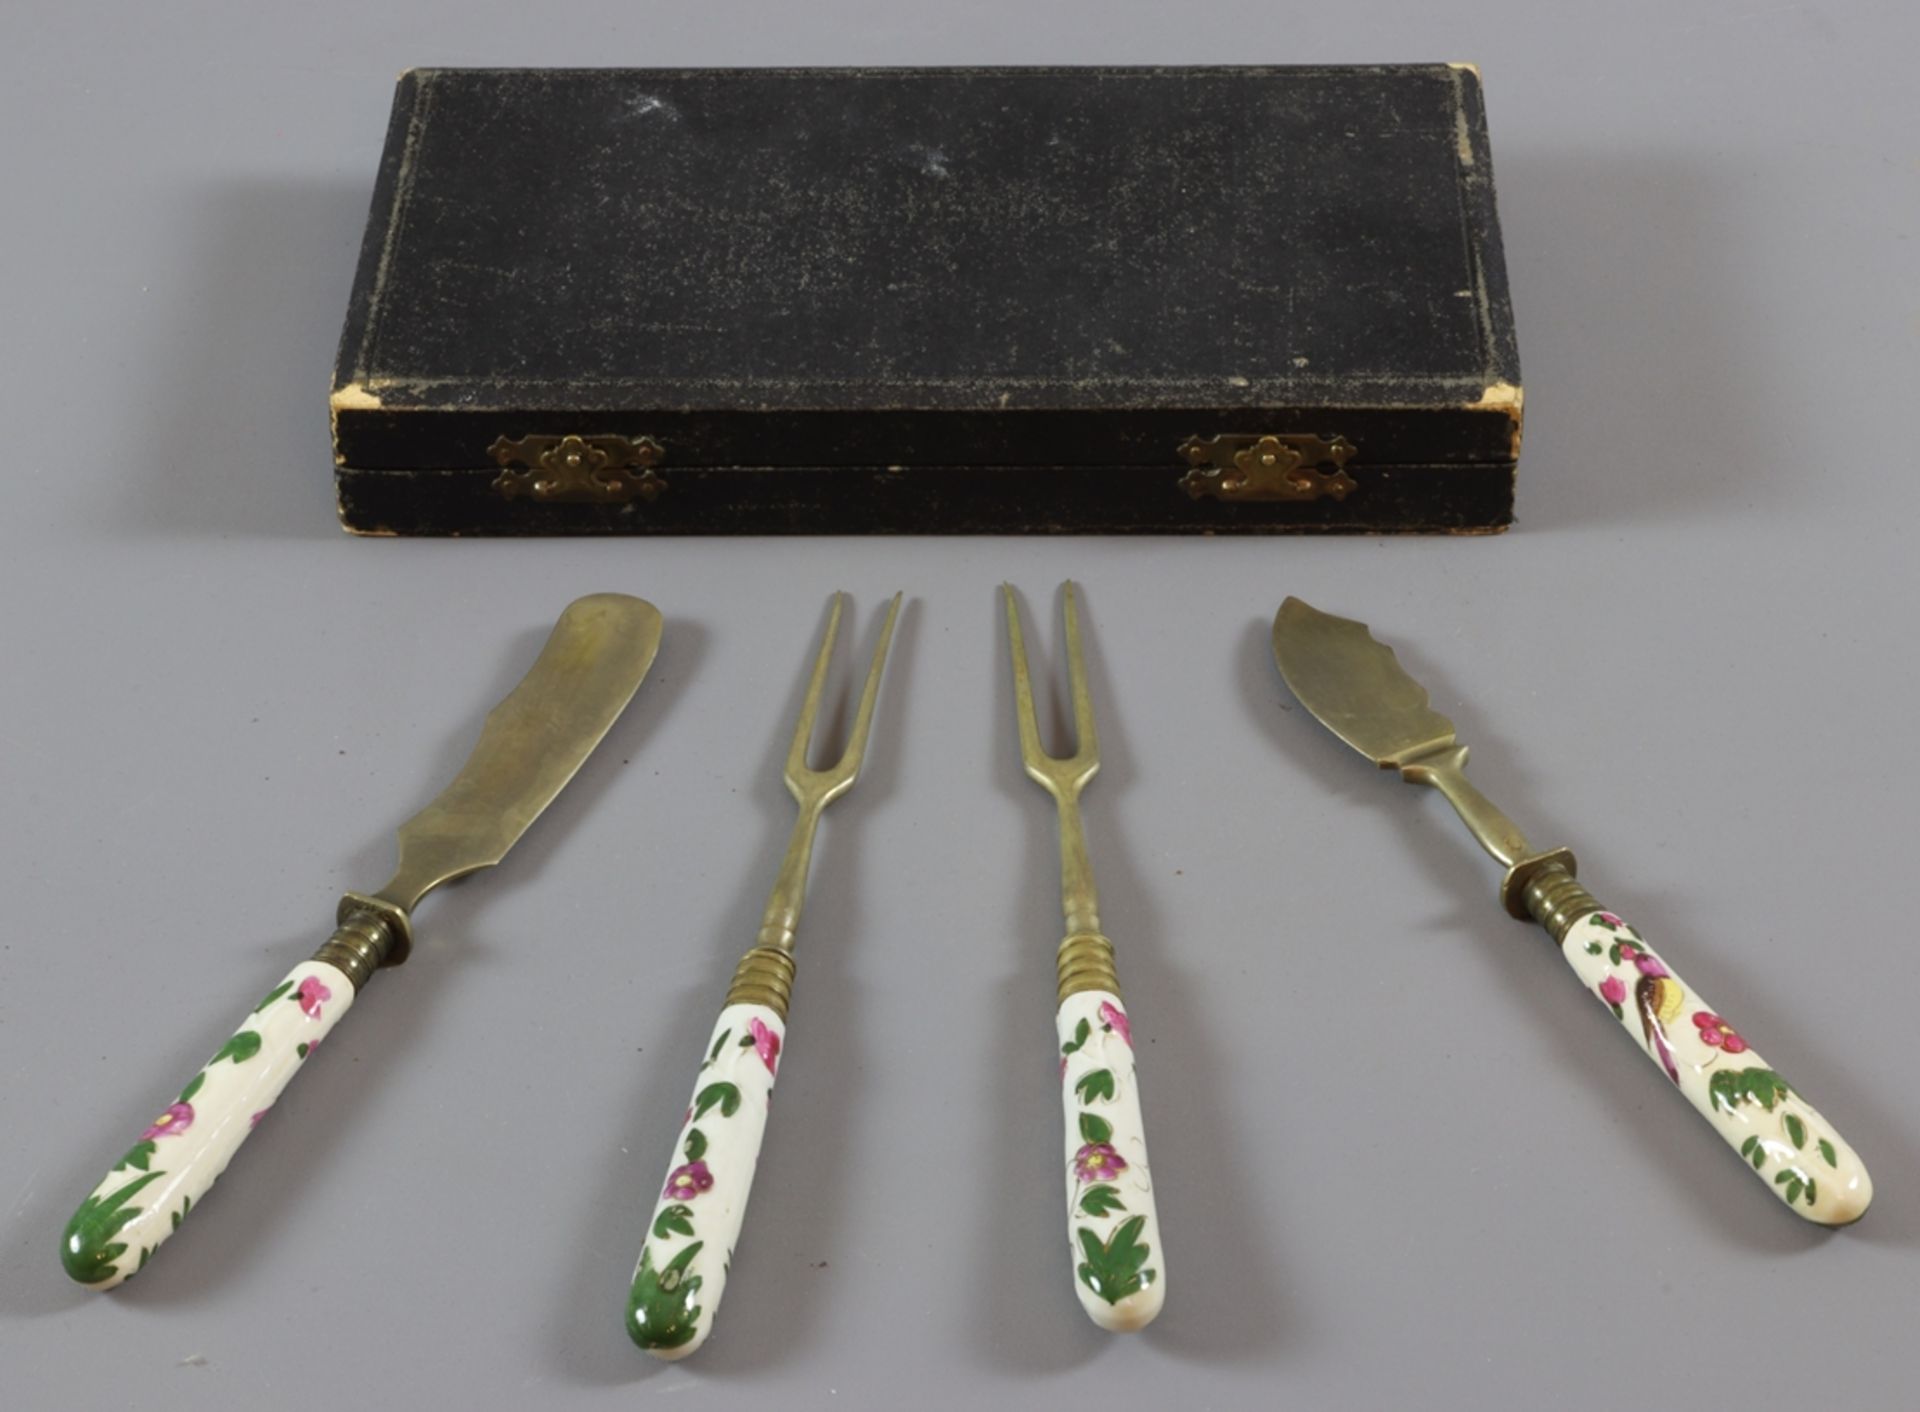 Historicist cheese cutlery in a box, 1900 - 1920, German - Image 2 of 2